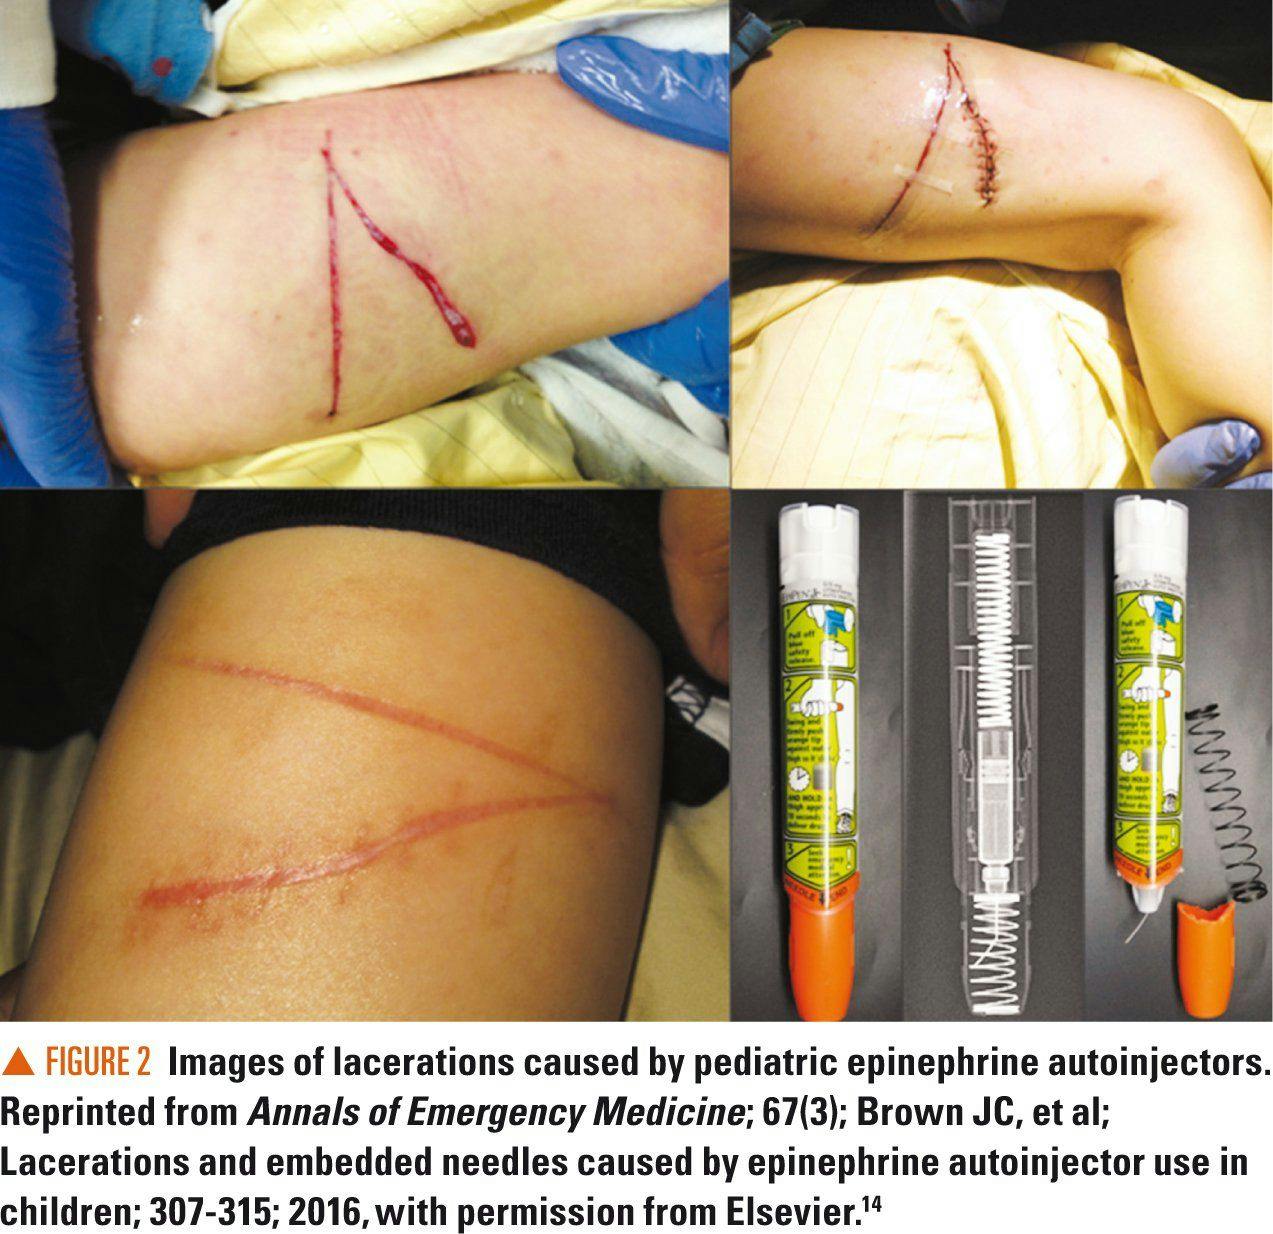 Images of lacerations caused by autoinjectors